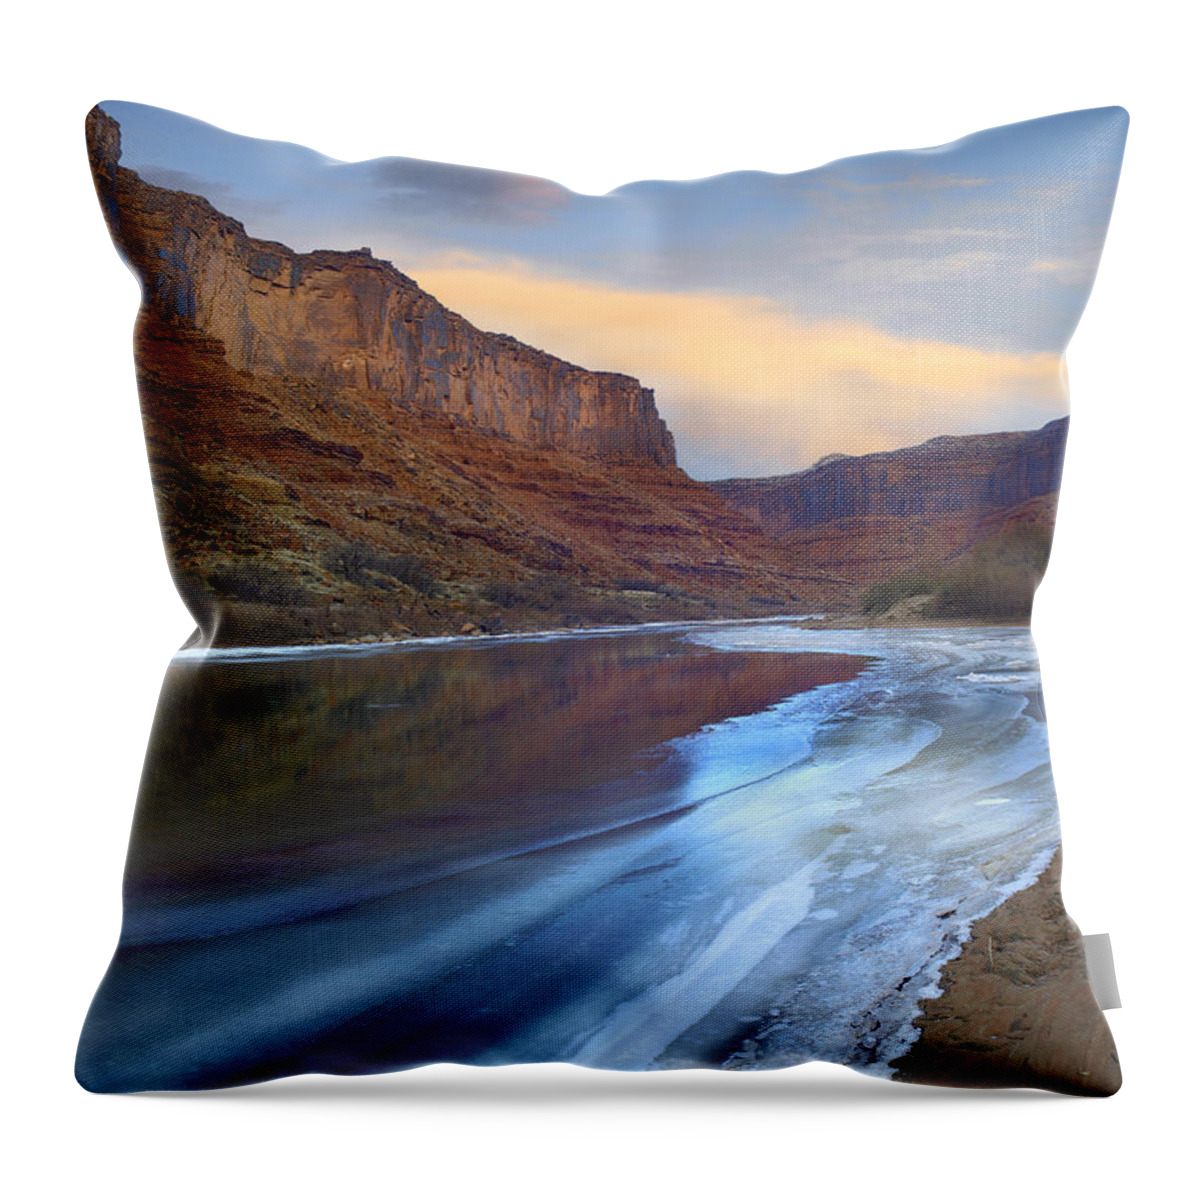 00175504 Throw Pillow featuring the photograph Ice On The Colorado River in Cataract Canyon by Tim Fitzharris